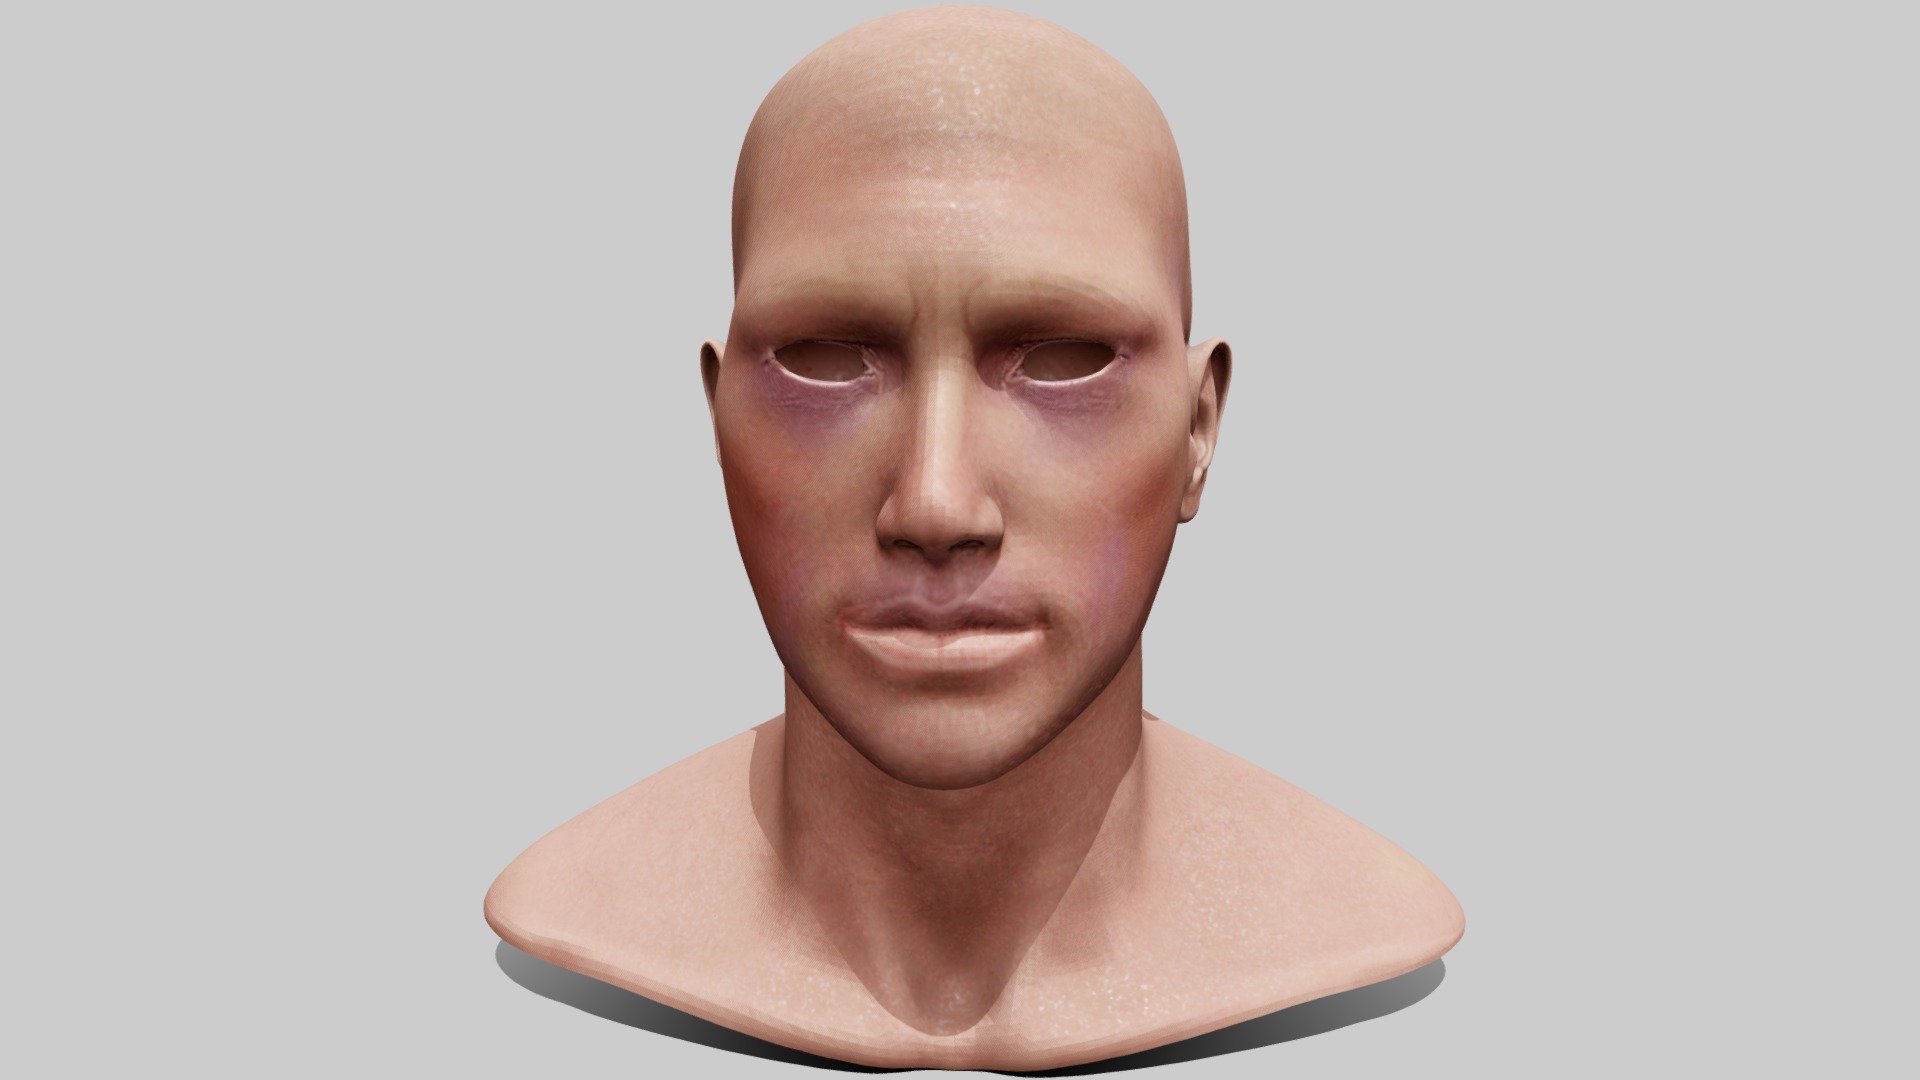 Adult Face 3d Model By Sam Samanthadefectuosa7893 Bb47500 Sketchfab 